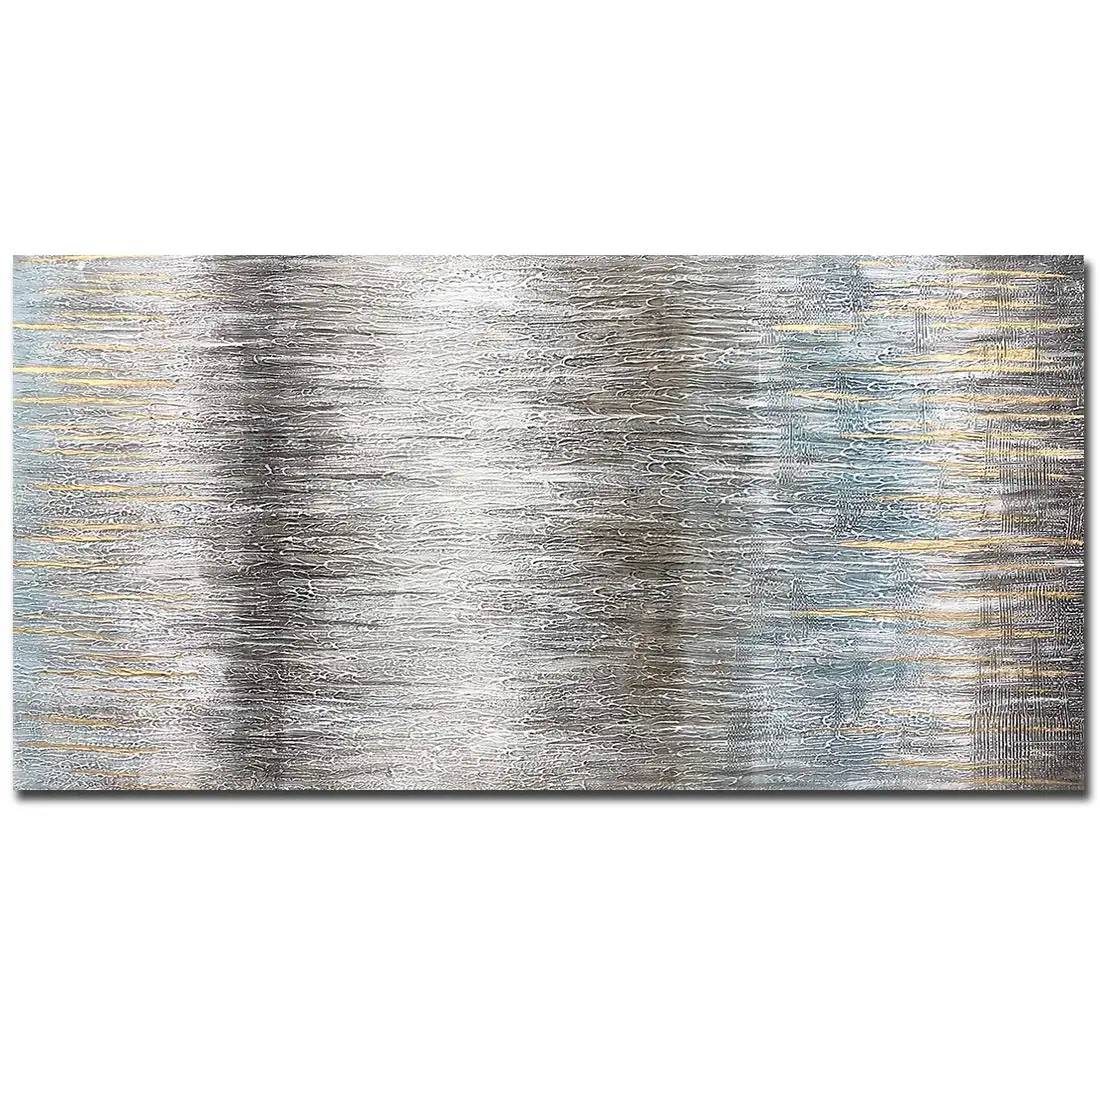 

Textured Hand-Painted Modern Oil Paintings Rectangular Abstract Contemporary Artwork Home Living Room Wall Decor Art No Framed